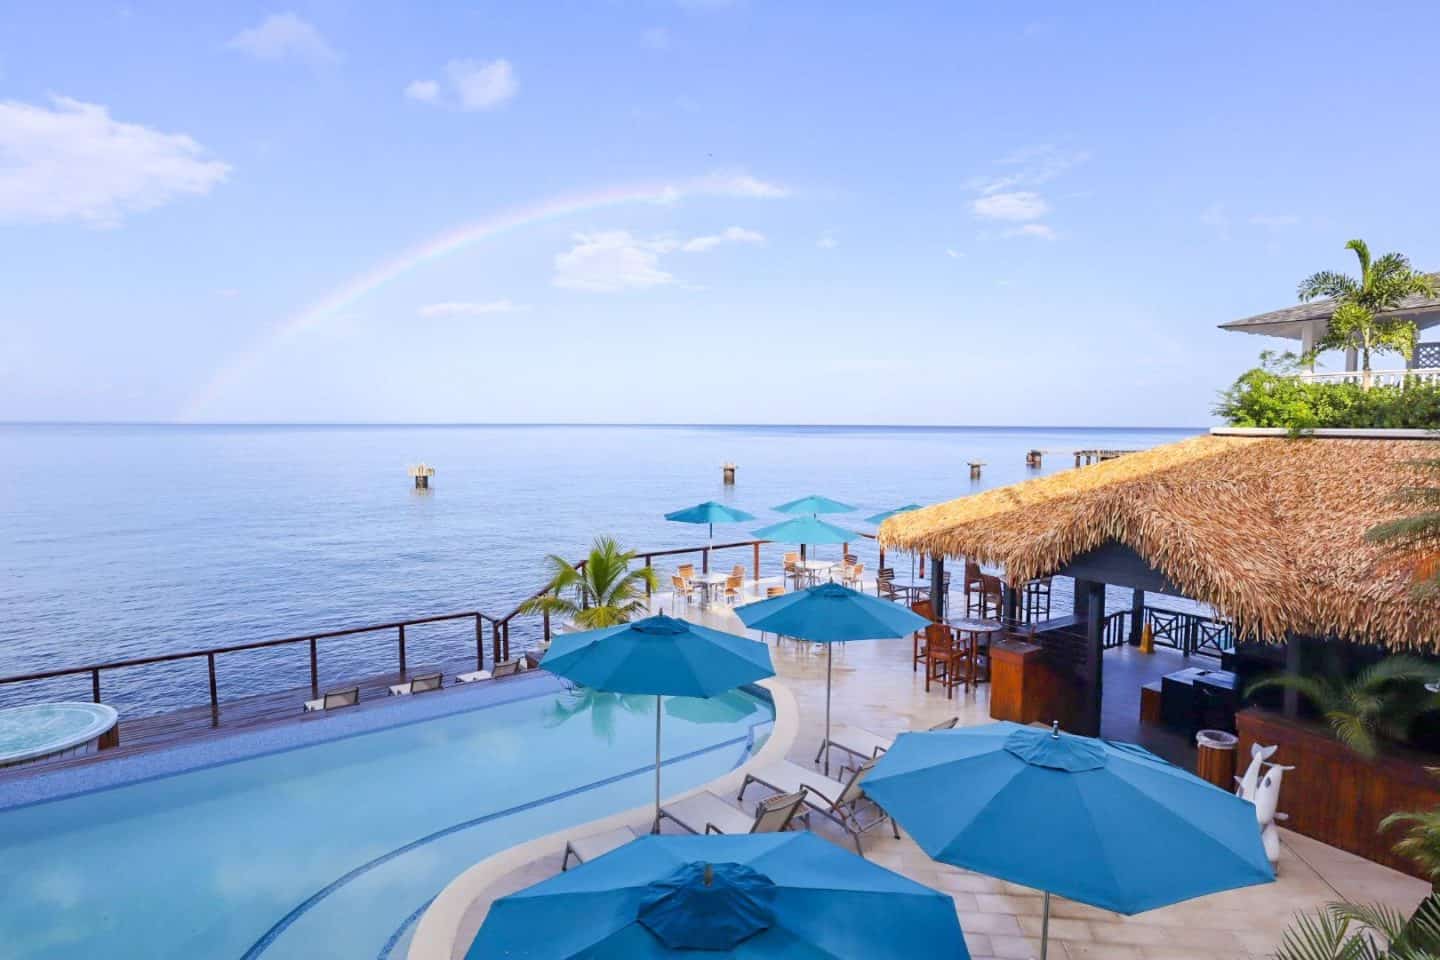 Dominica travel guide, Fort Young Hotel Roseau Dominica Swimming pool and ocean view with rainbow